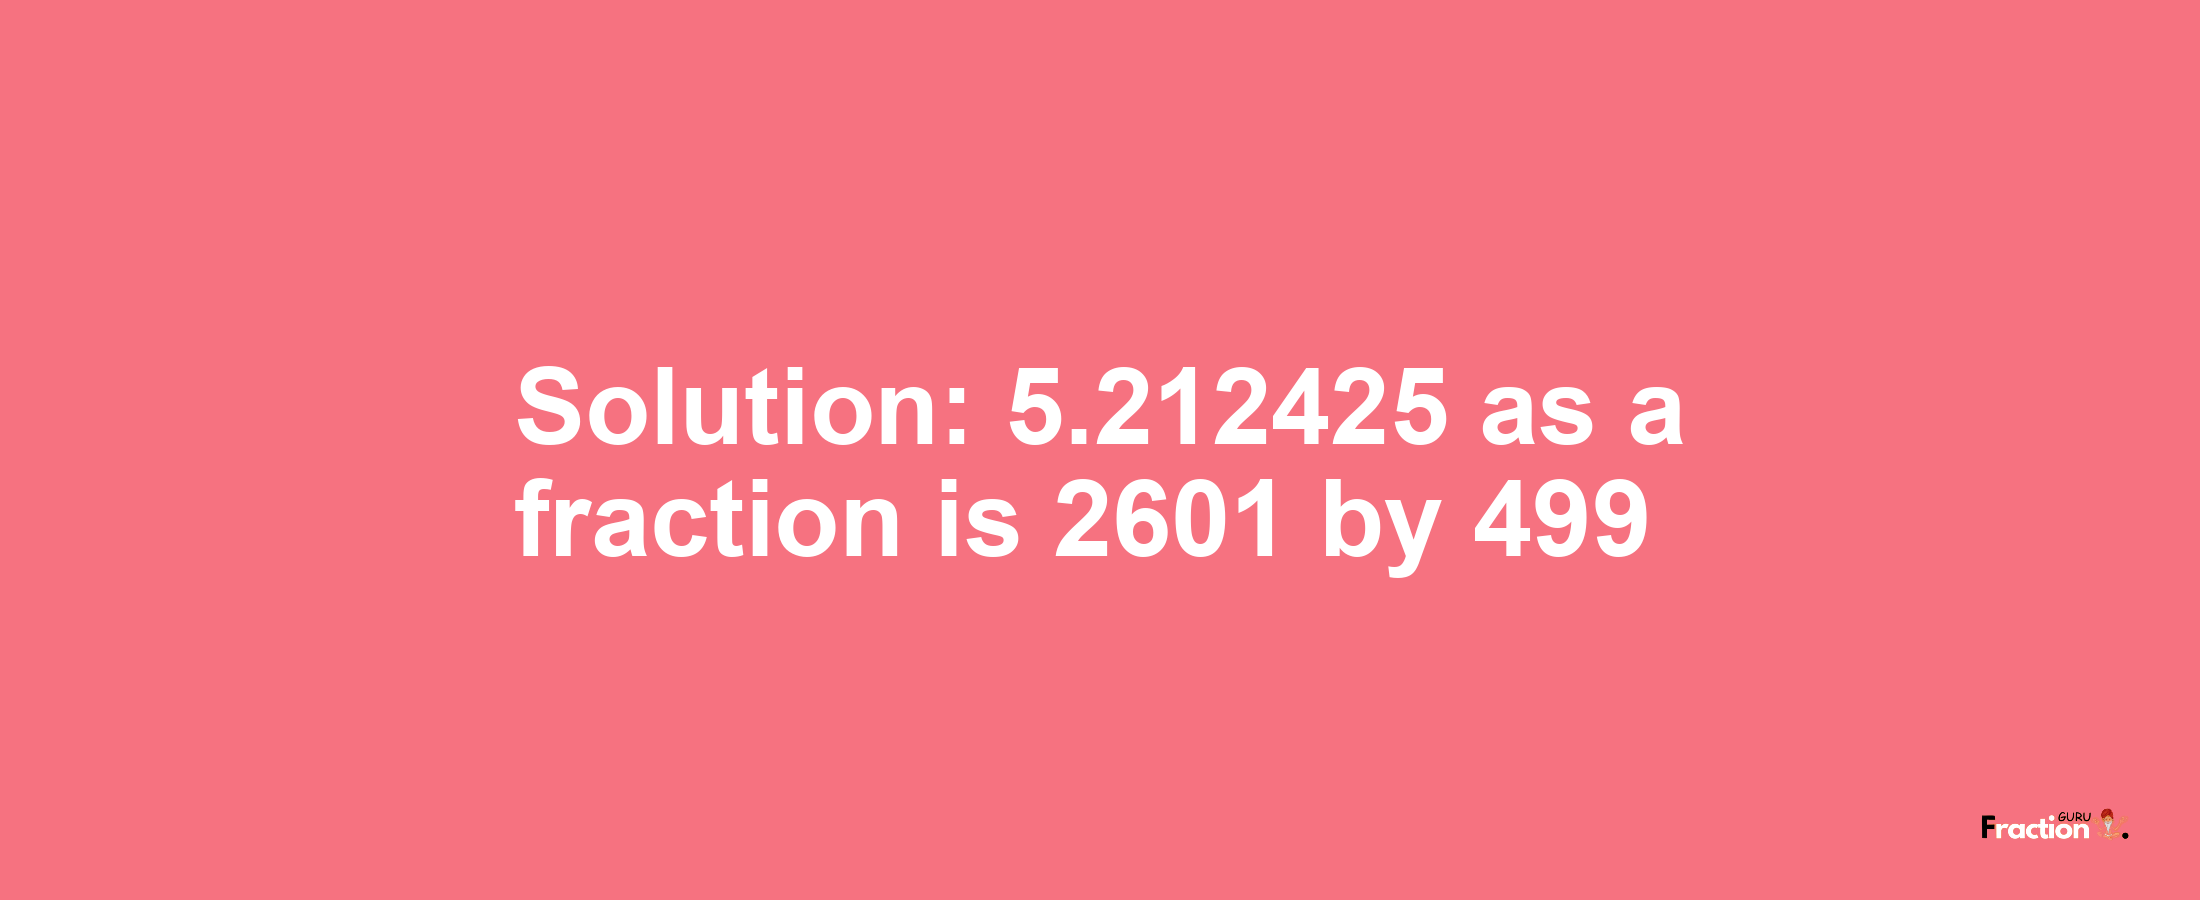 Solution:5.212425 as a fraction is 2601/499